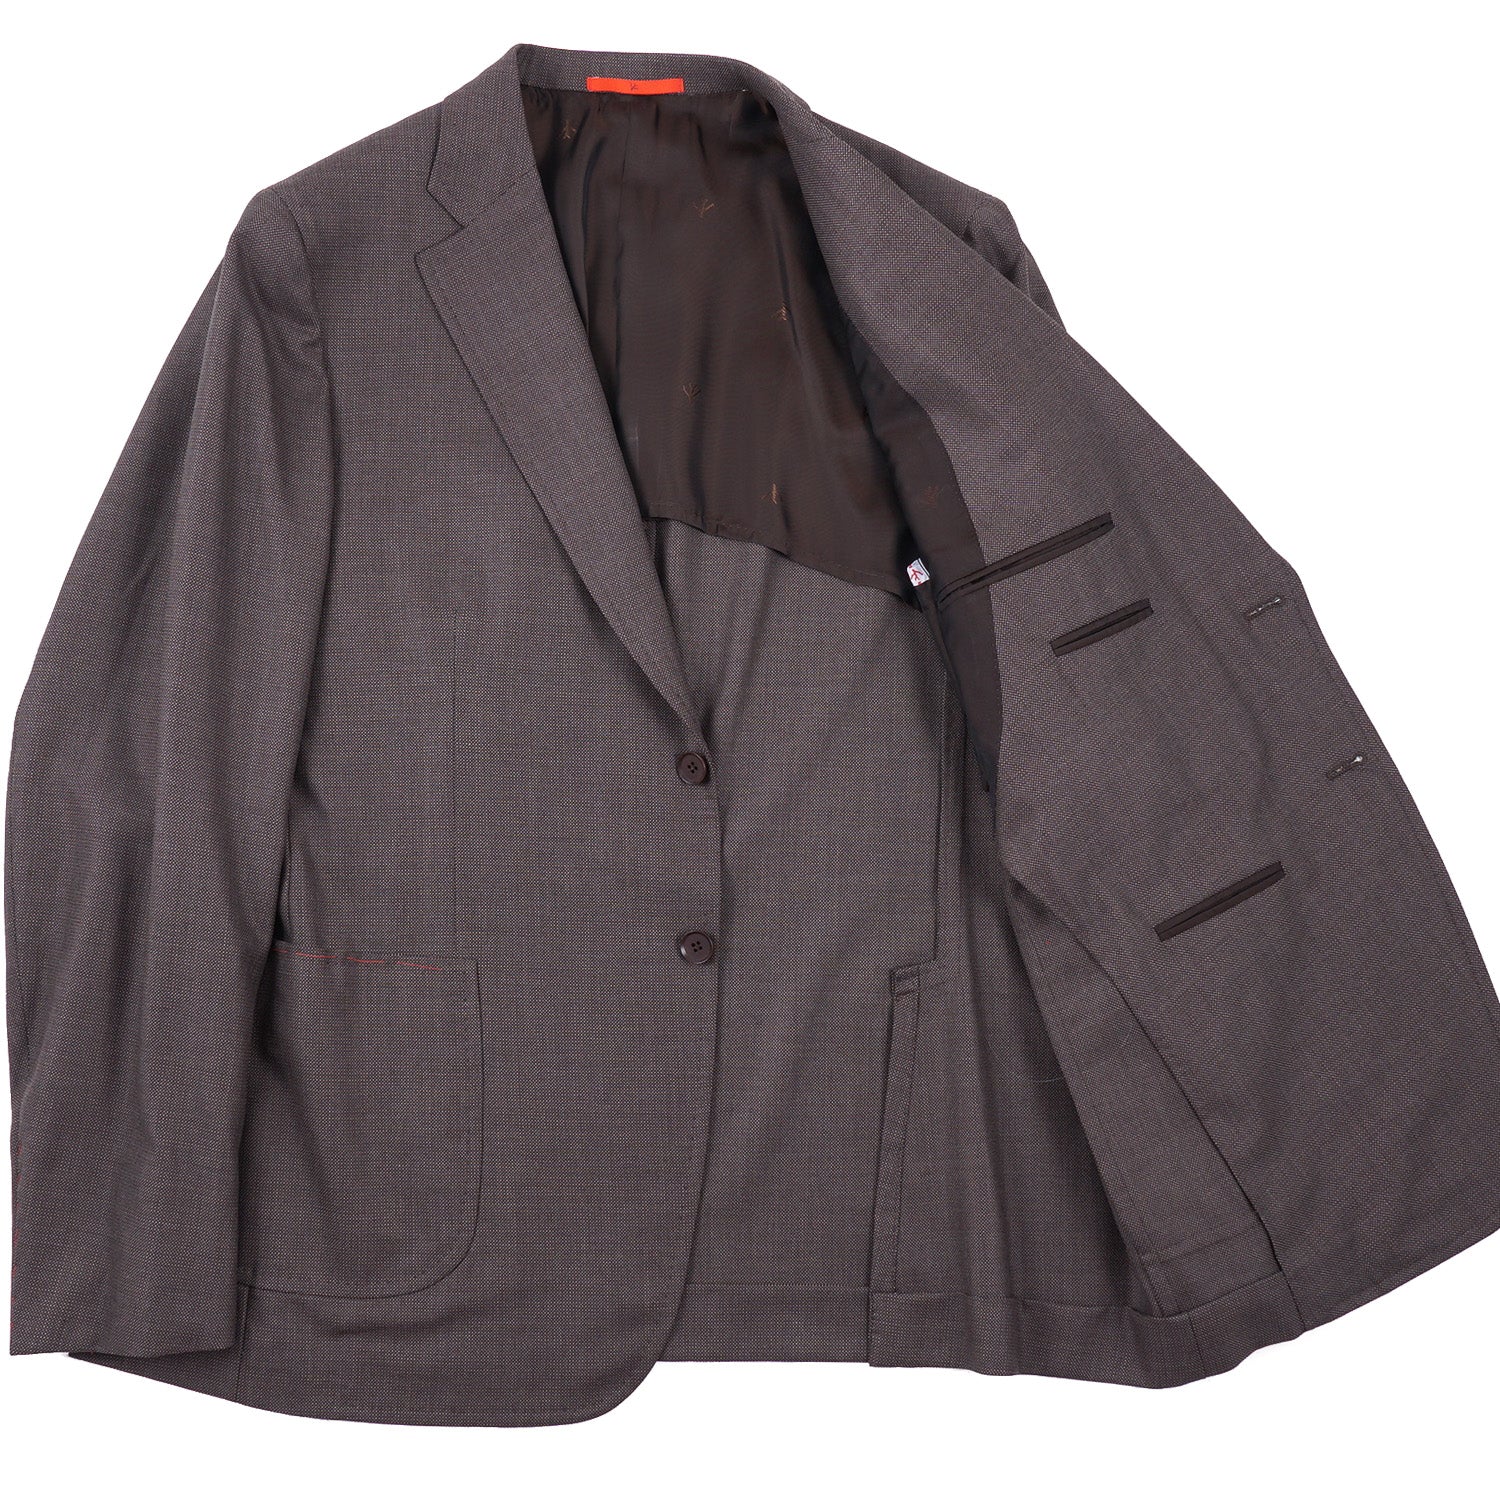 Isaia Extra-Slim 160s Wool Suit - Top Shelf Apparel